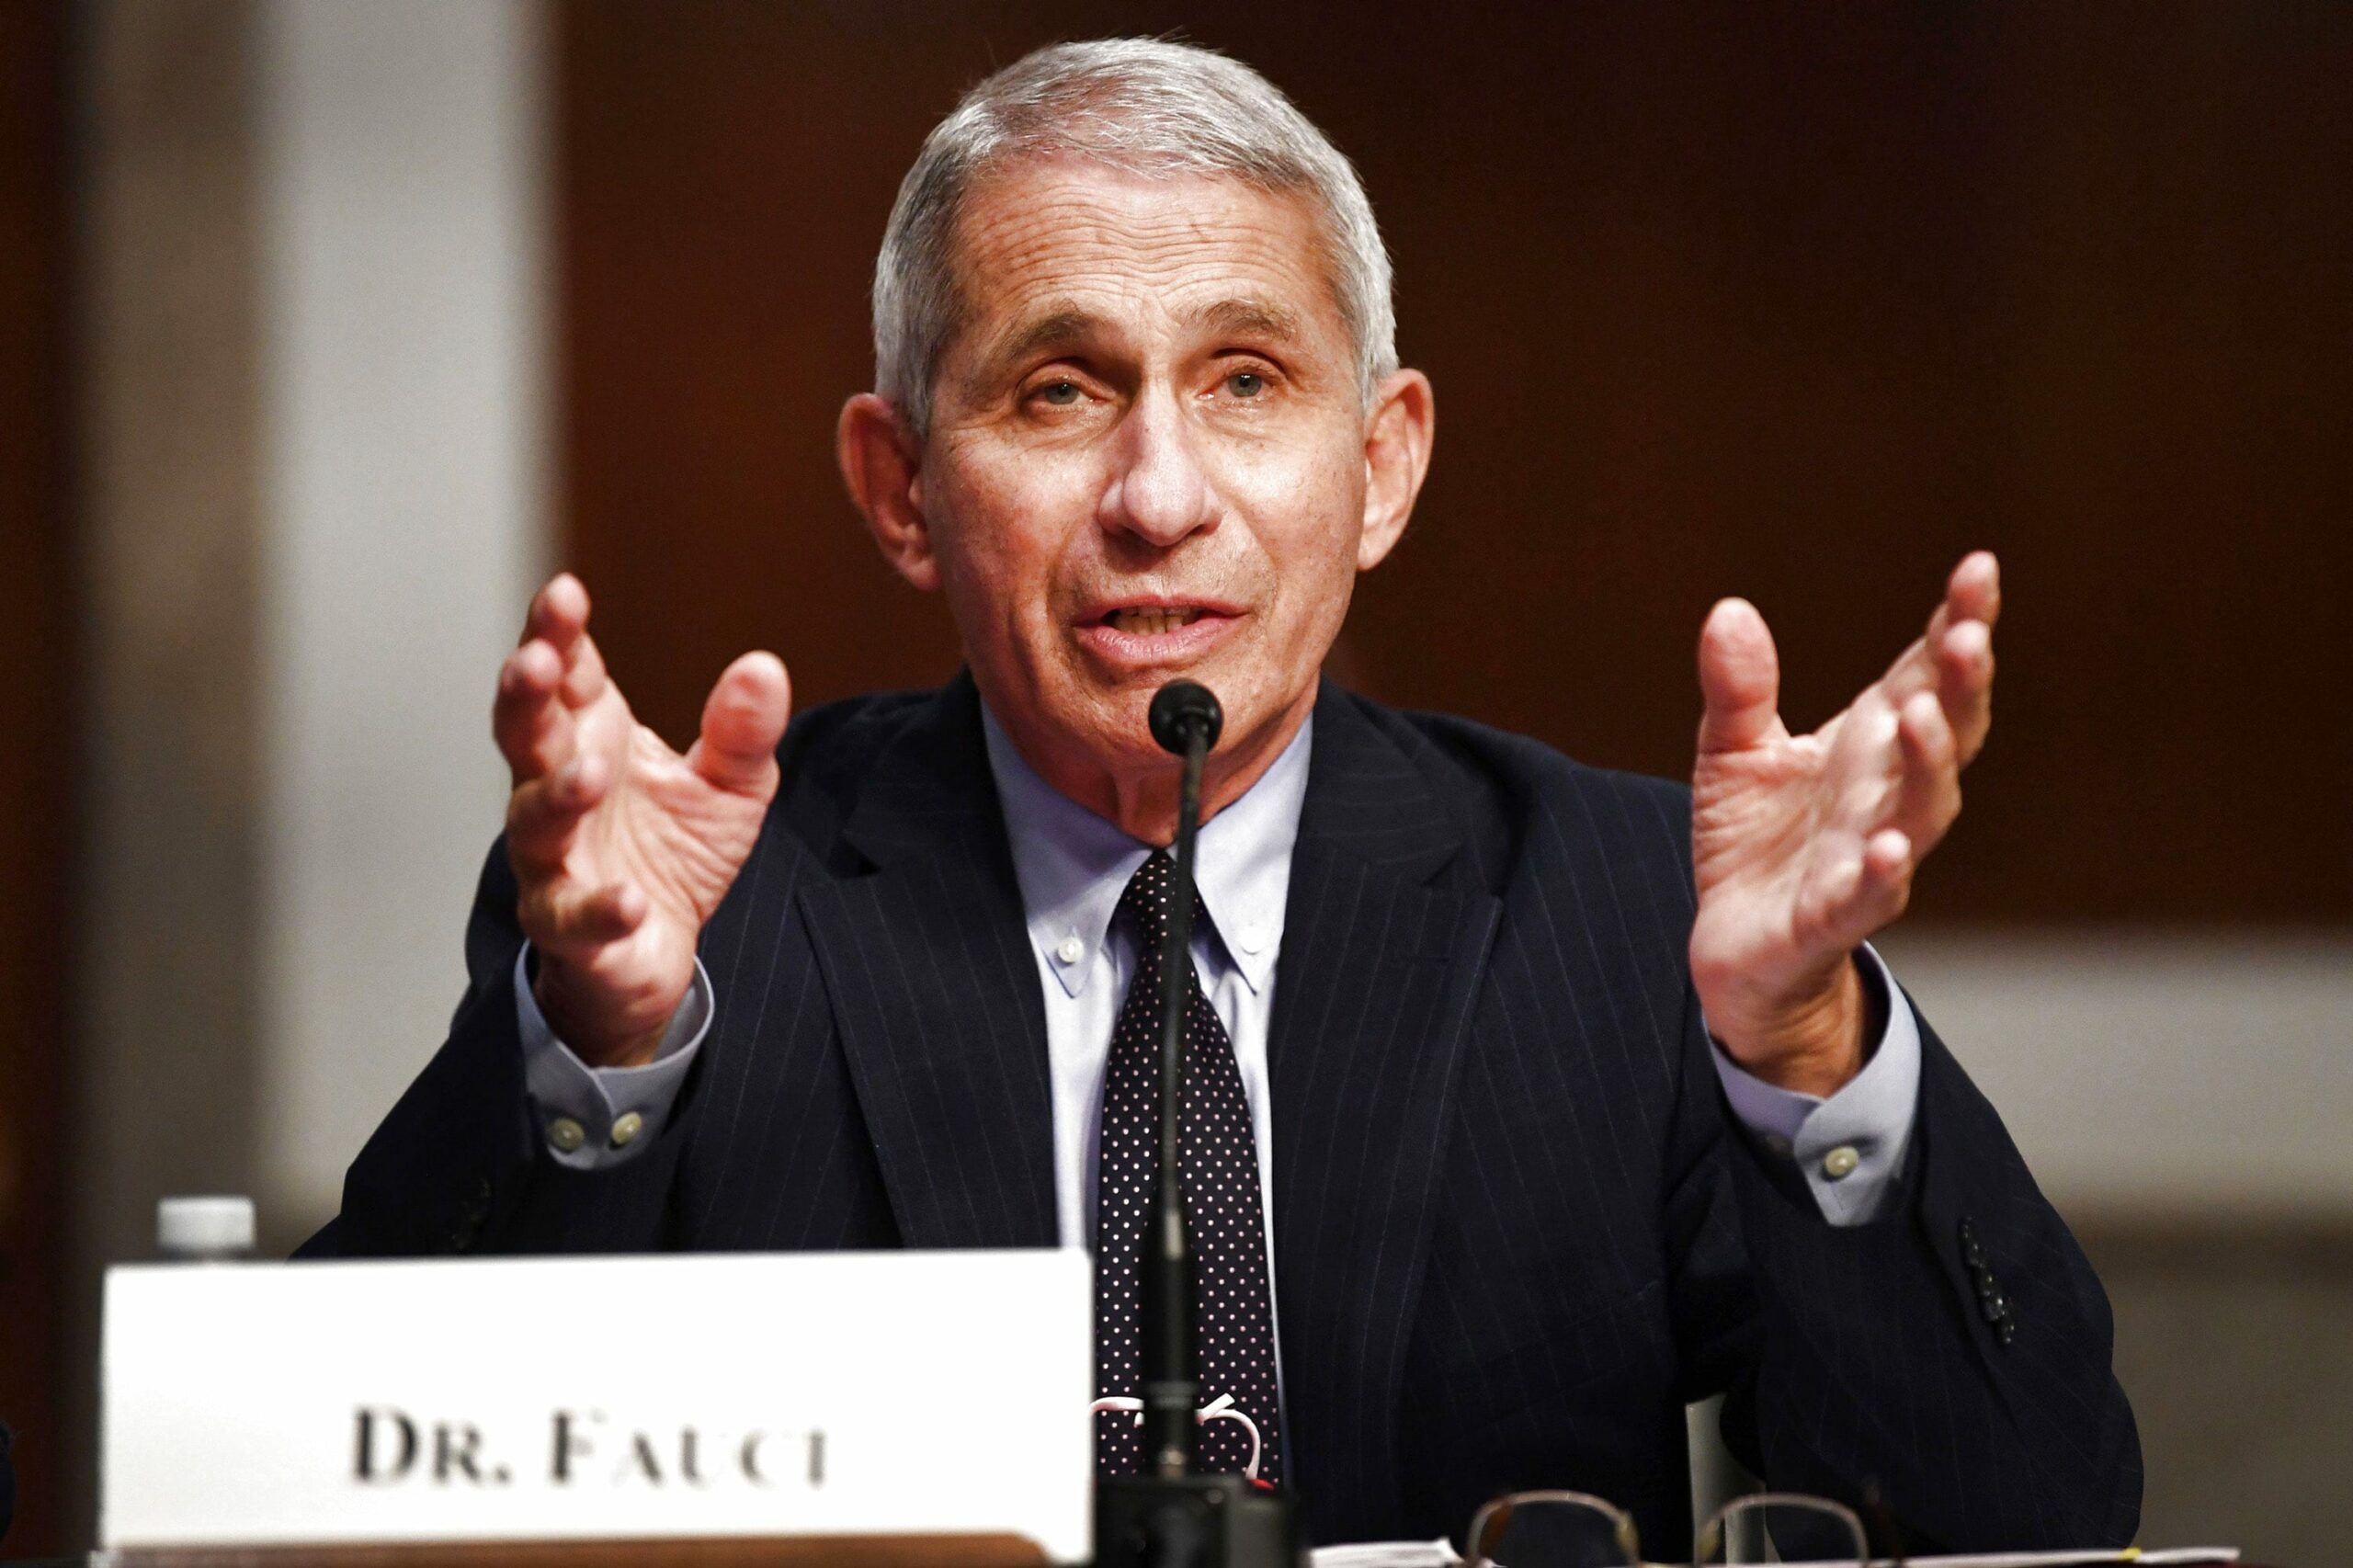 Dr. Anthony Fauci says new virus in China has traits of 2009 swine flu and 1918 pandemic flu